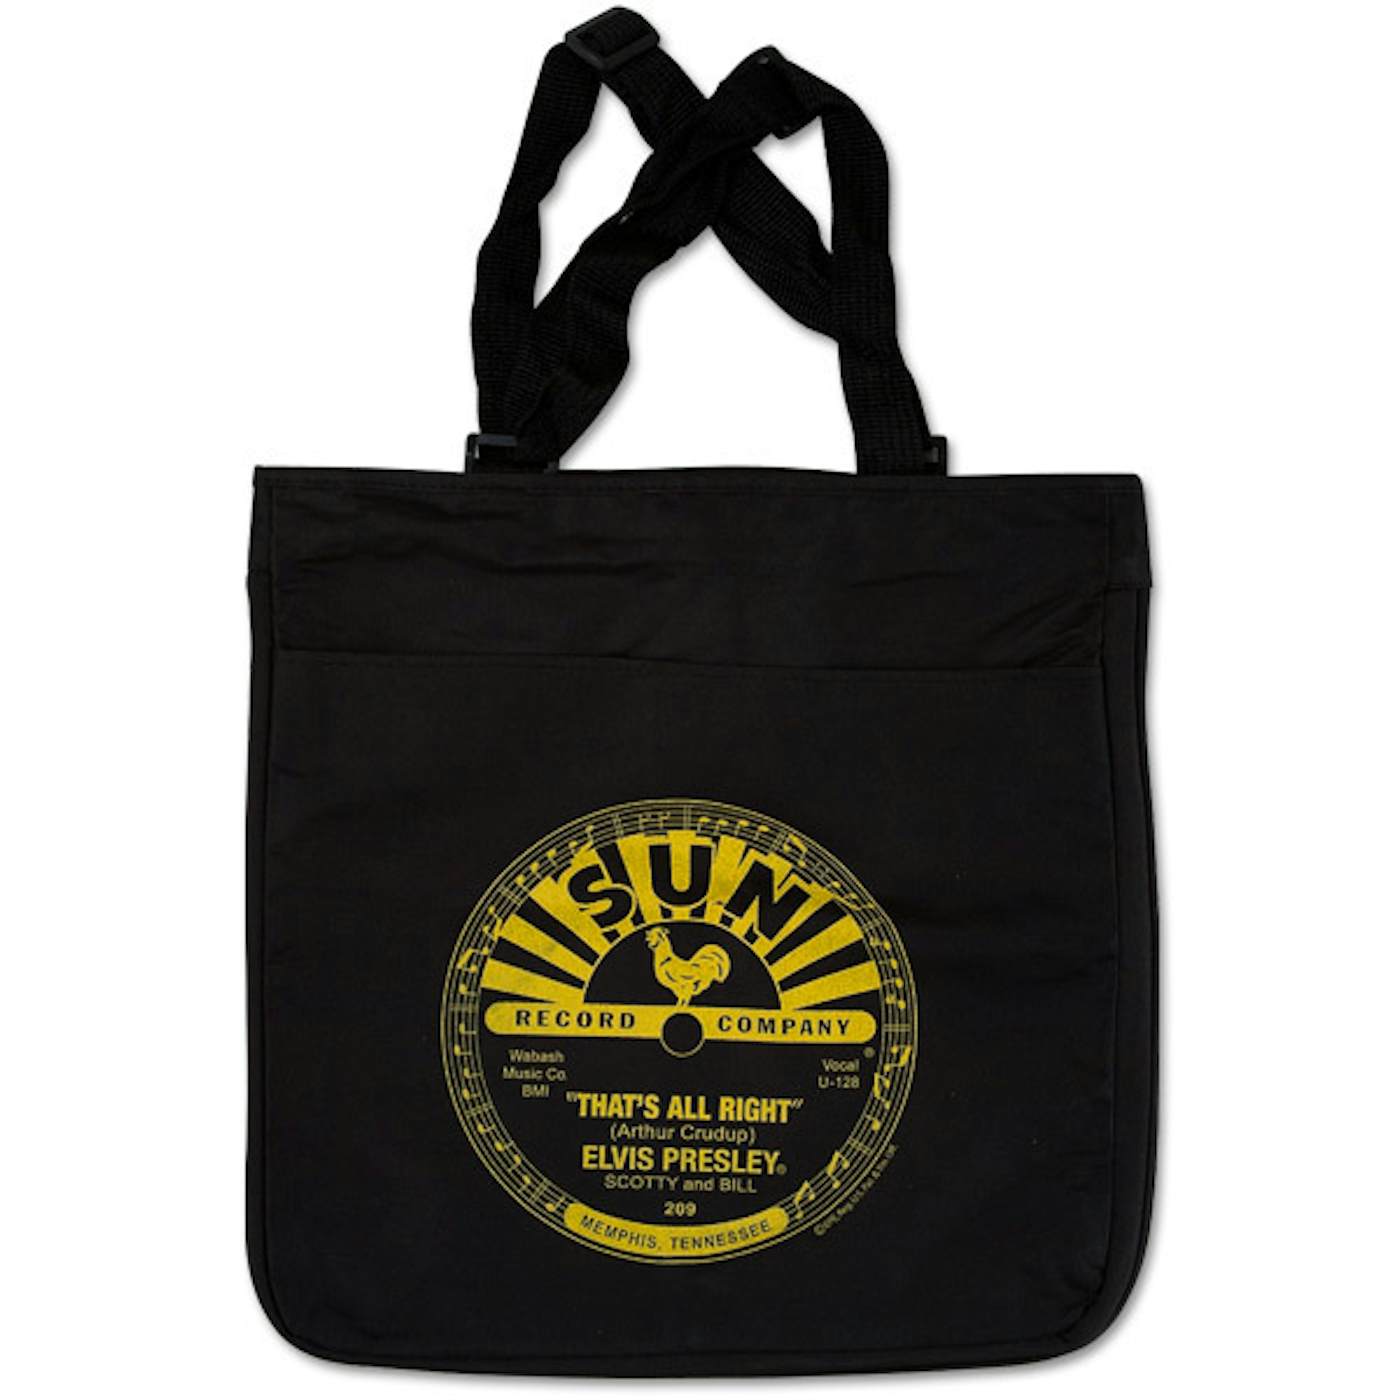 Elvis Presley - That's All Right Black Tote Bag